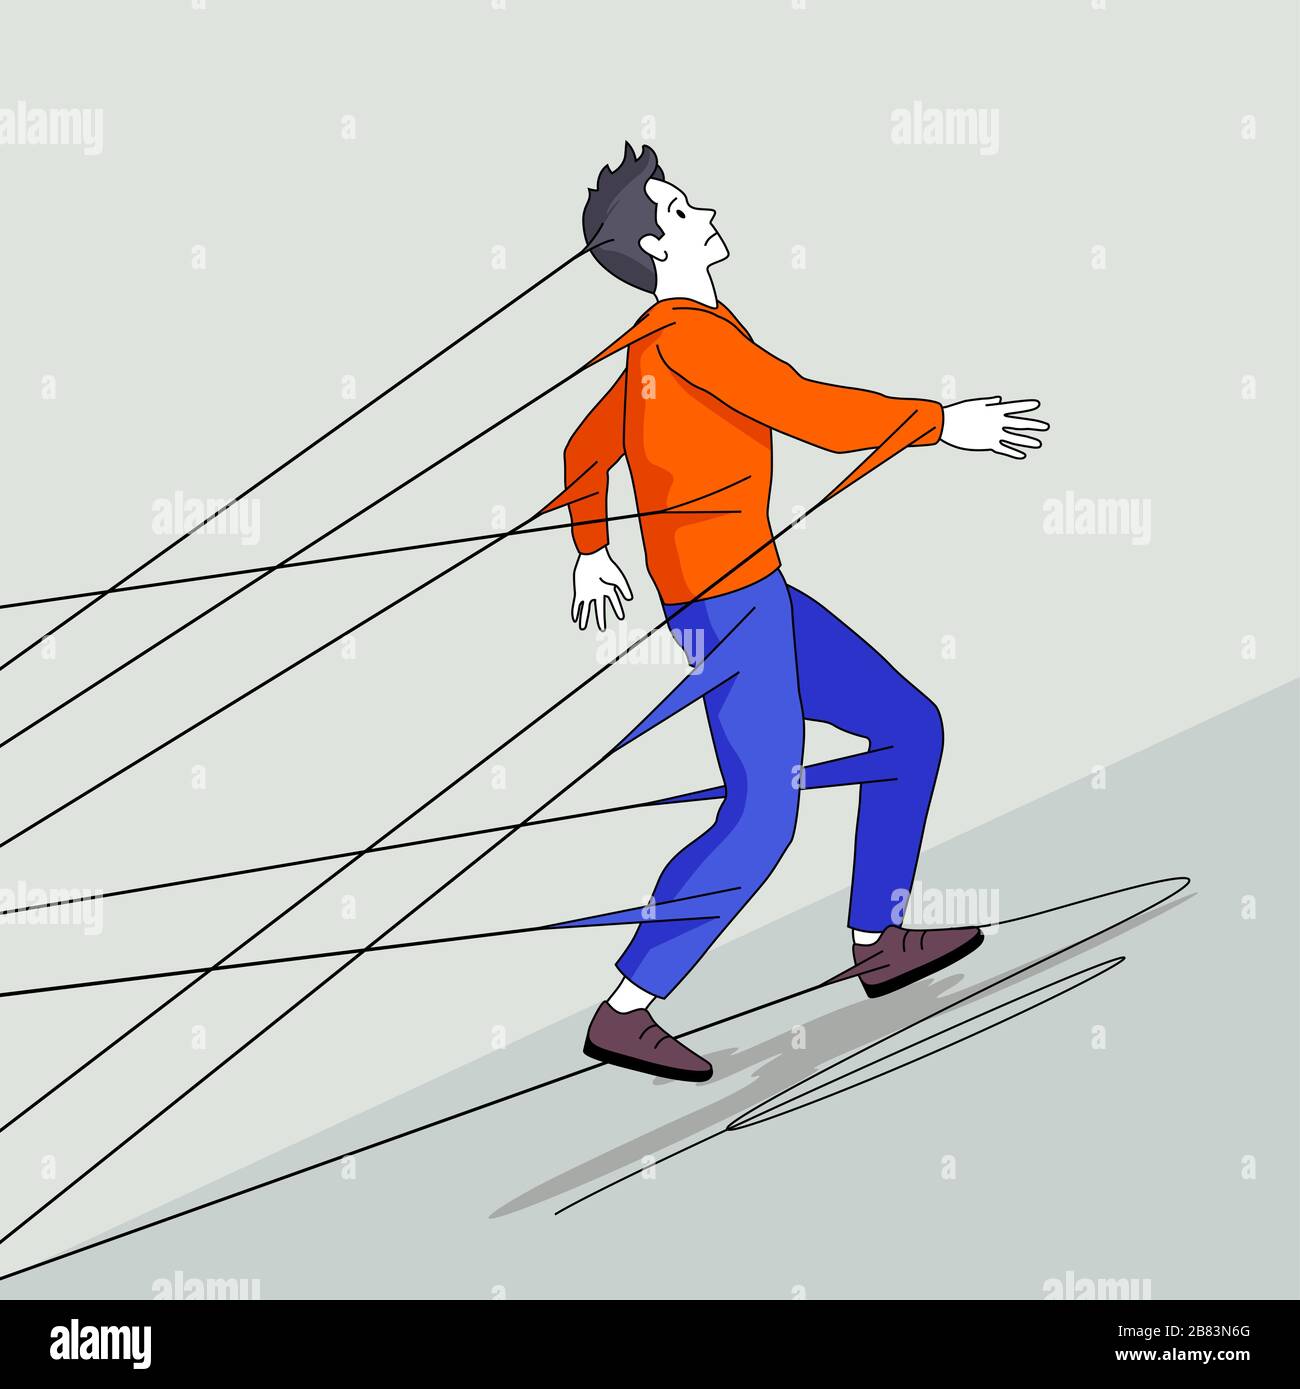 A man trying to walk away but being held back by strings attached to him. People vector illustration concept. Stock Vector